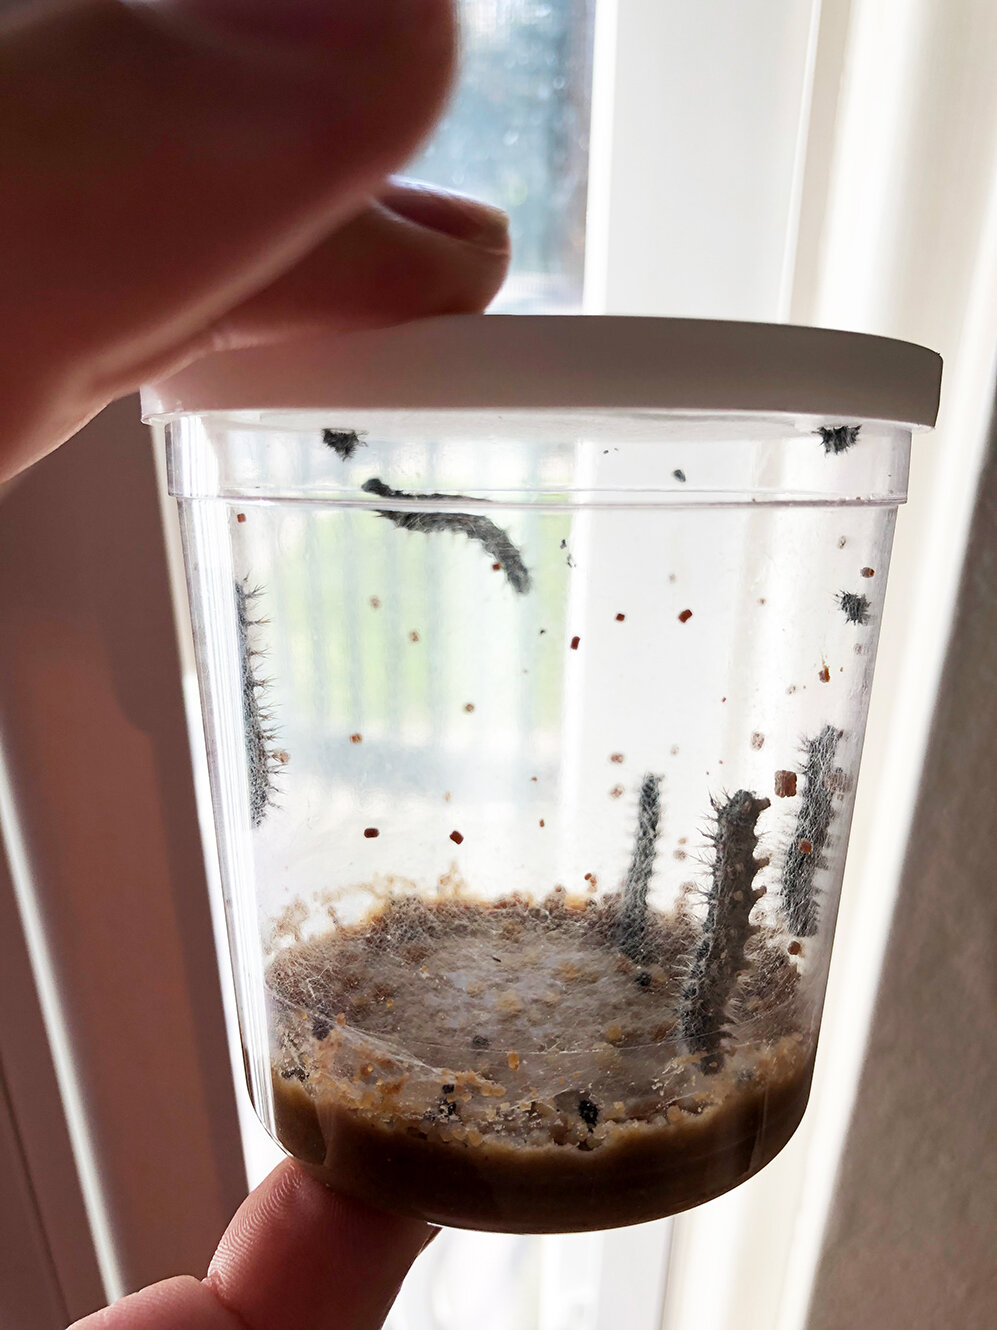  The caterpillars continued to eat and grow. Soon, they began to slowly make their way up to the top of their container. 